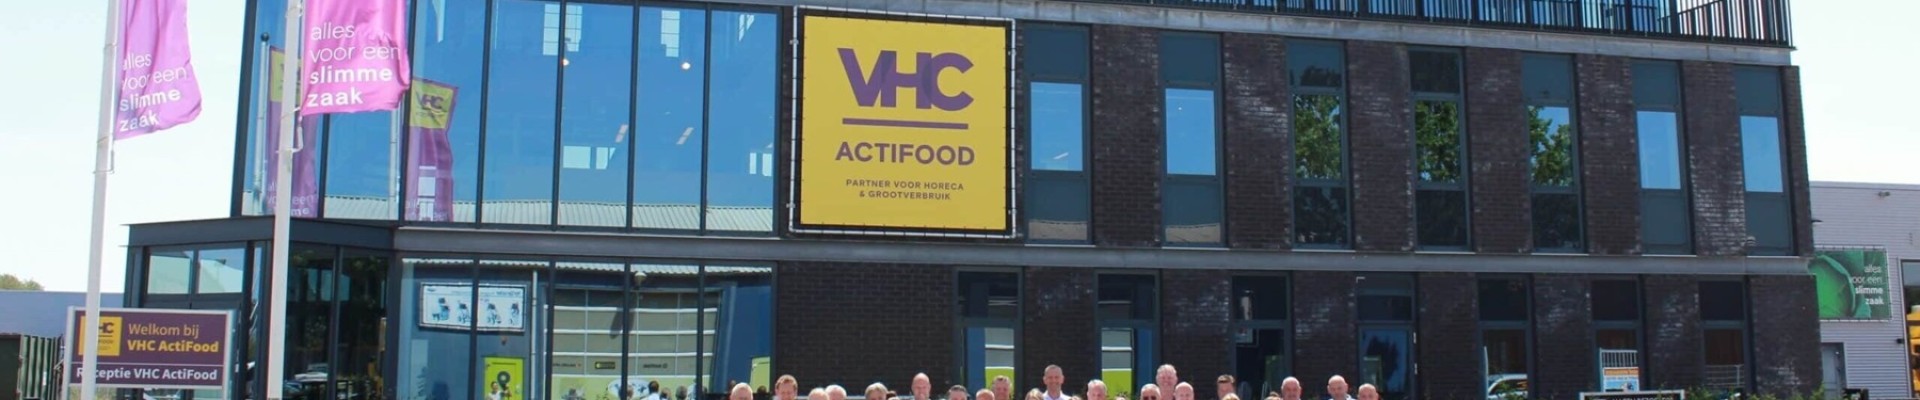 VHC ActiFood BV cover foto